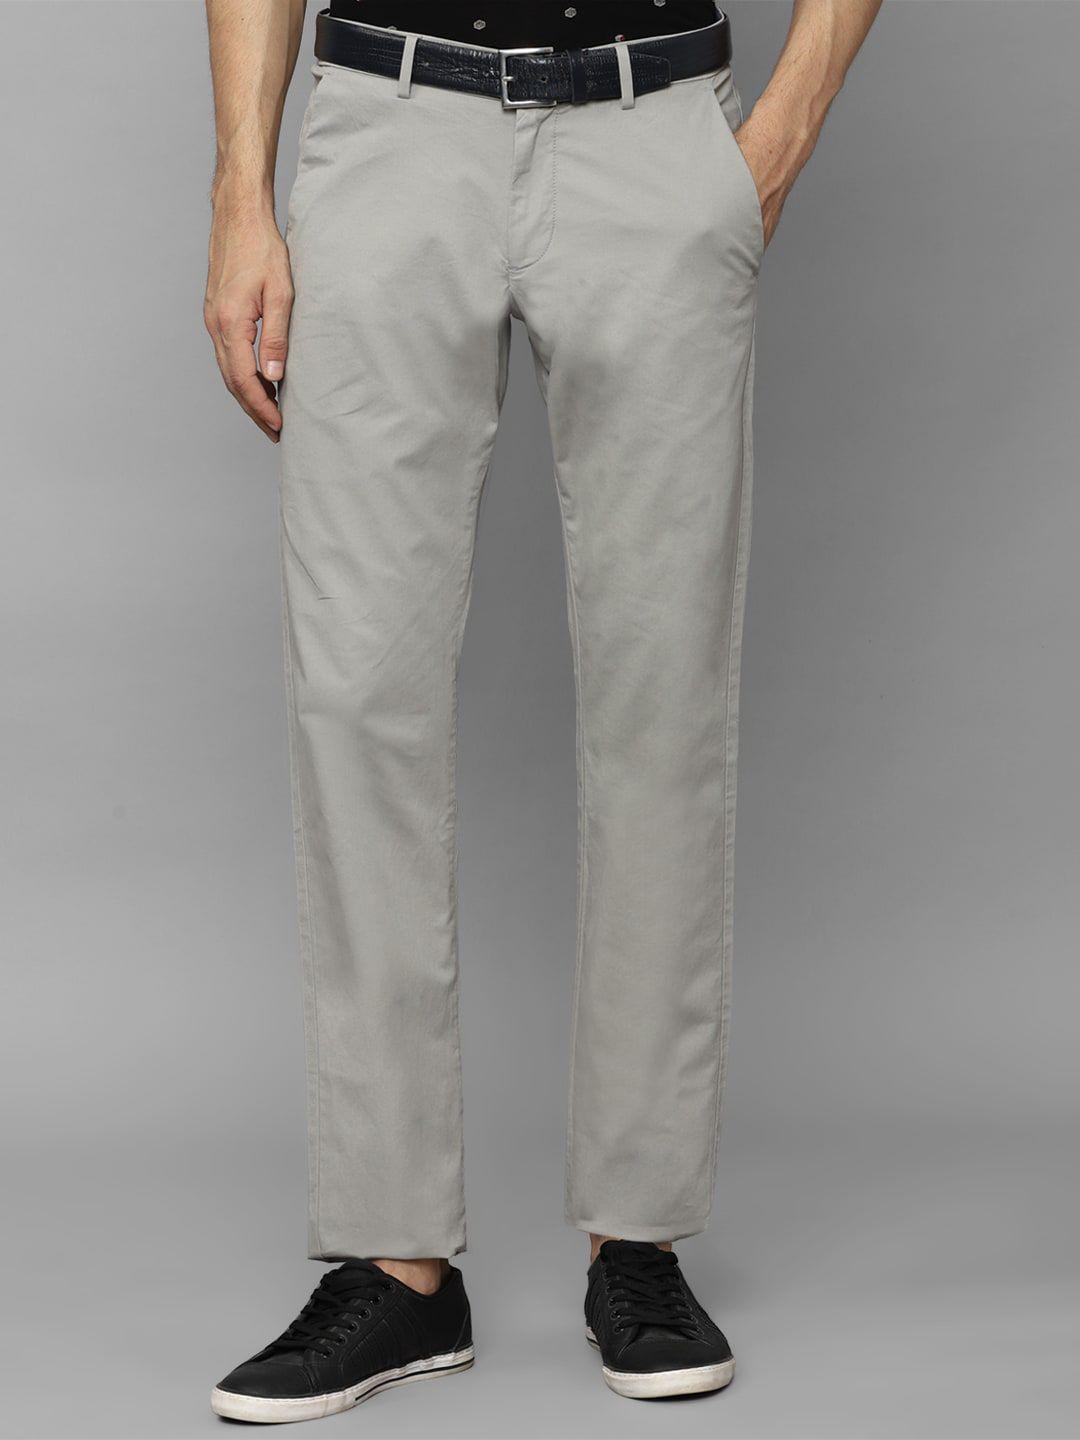 allen-solly-men-slim-fit-tailored-chinos-trousers